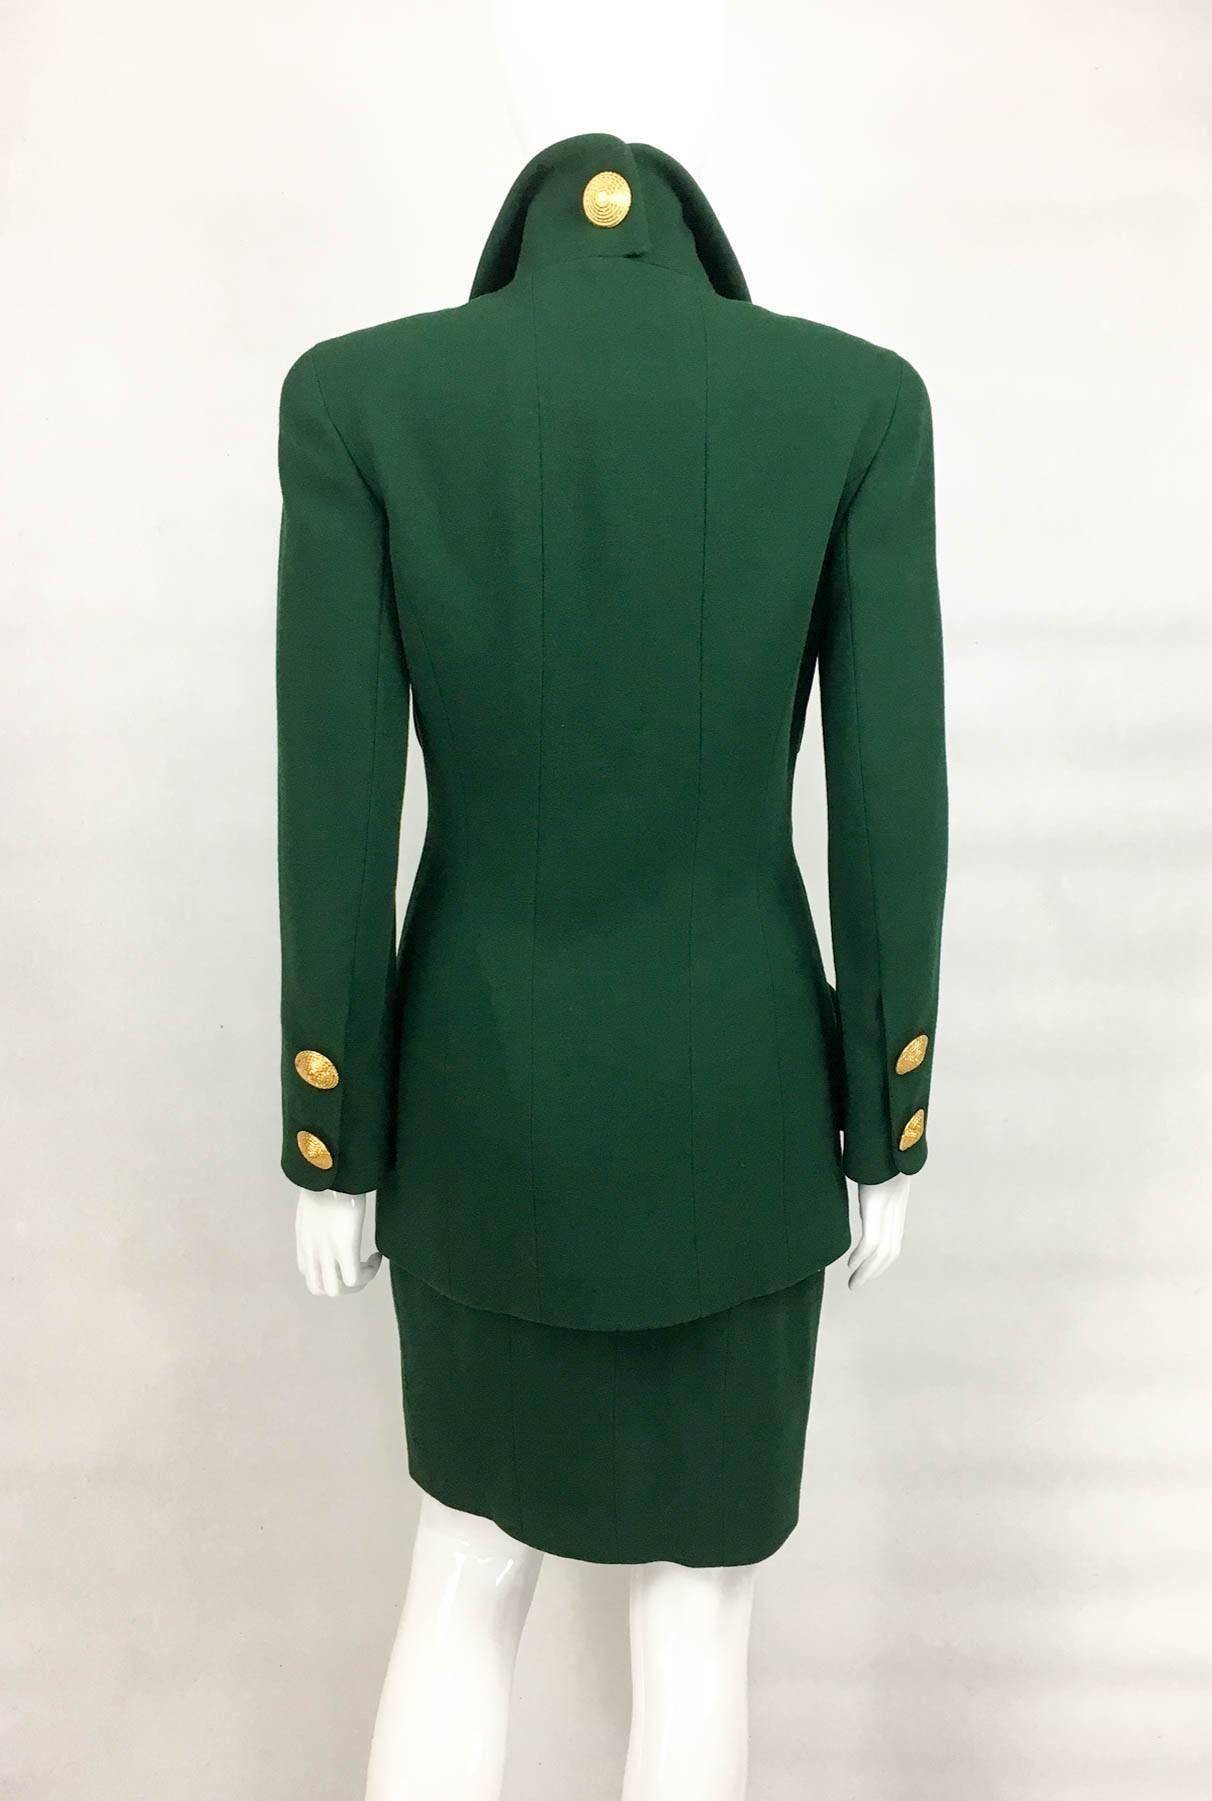 Chanel Bottle Green Wool Suit With Large Gold-Tone Logo Rope Buttons - 1992 1